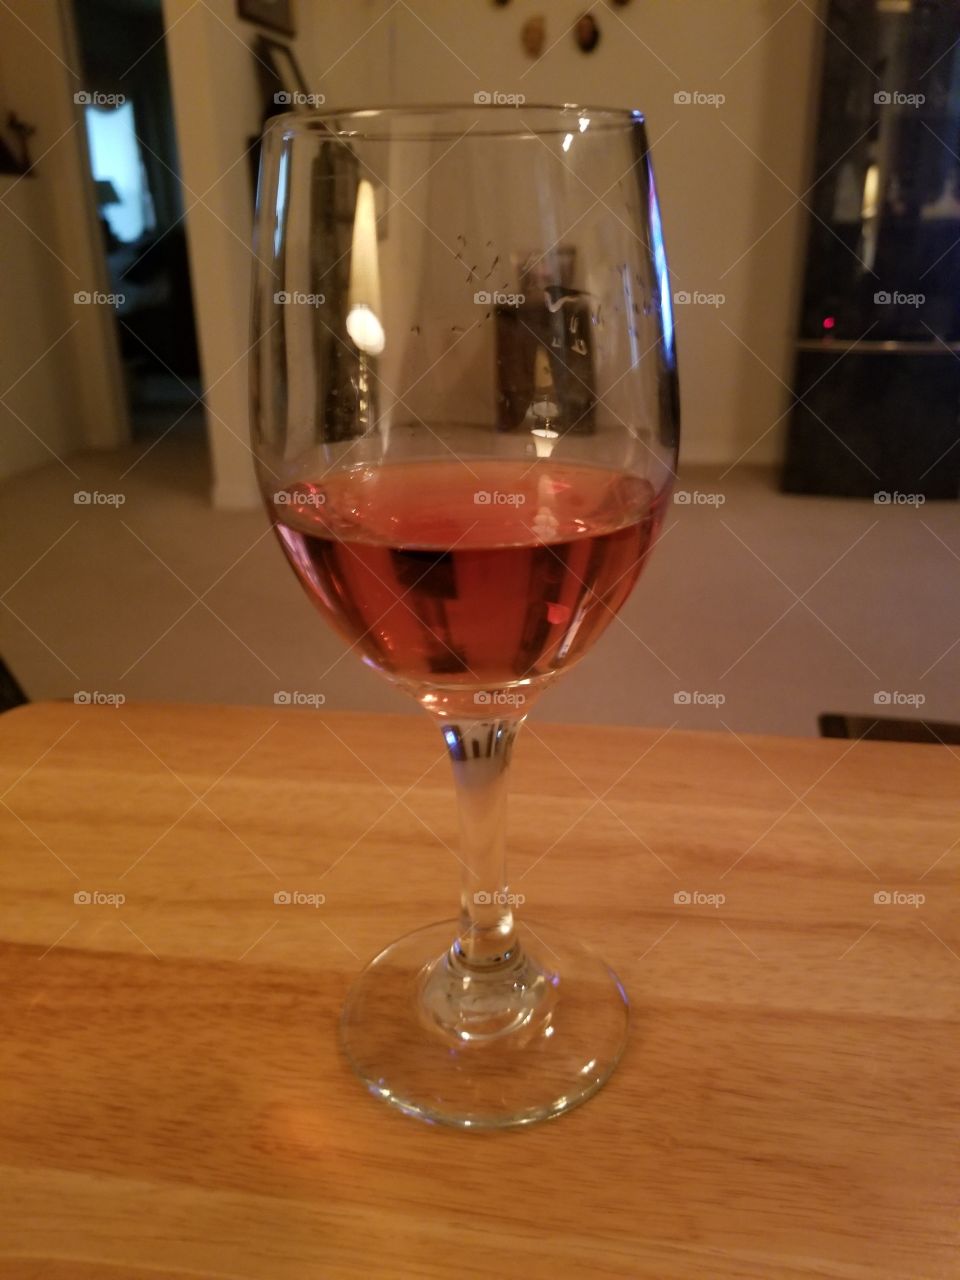 A little wine makes everything better.